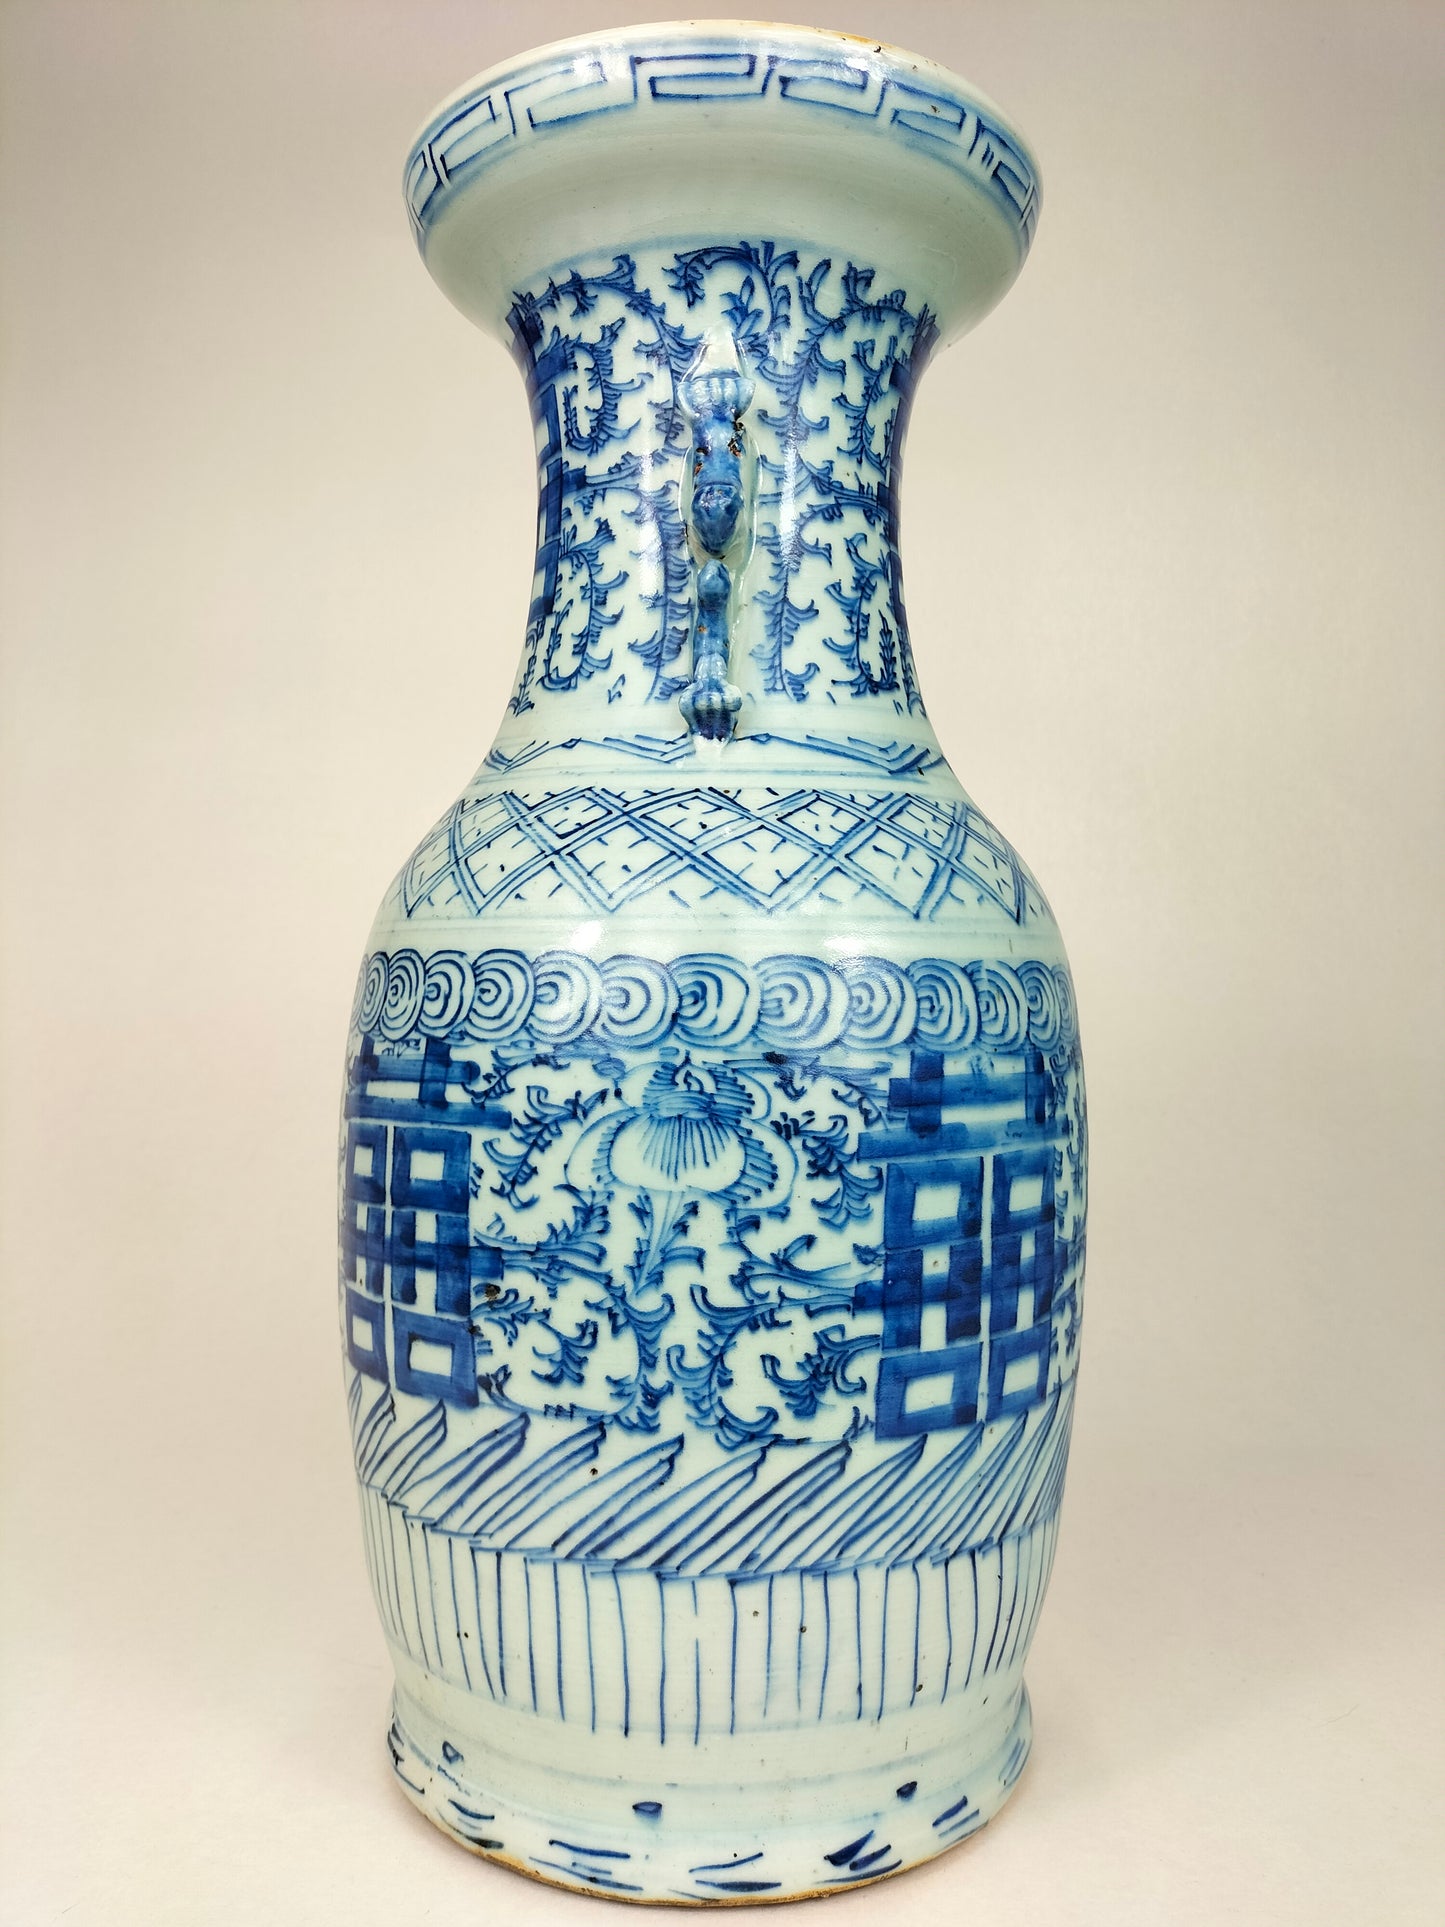 Antique Chinese double happiness vase // Blue and white - Qing Dynasty - 19th century